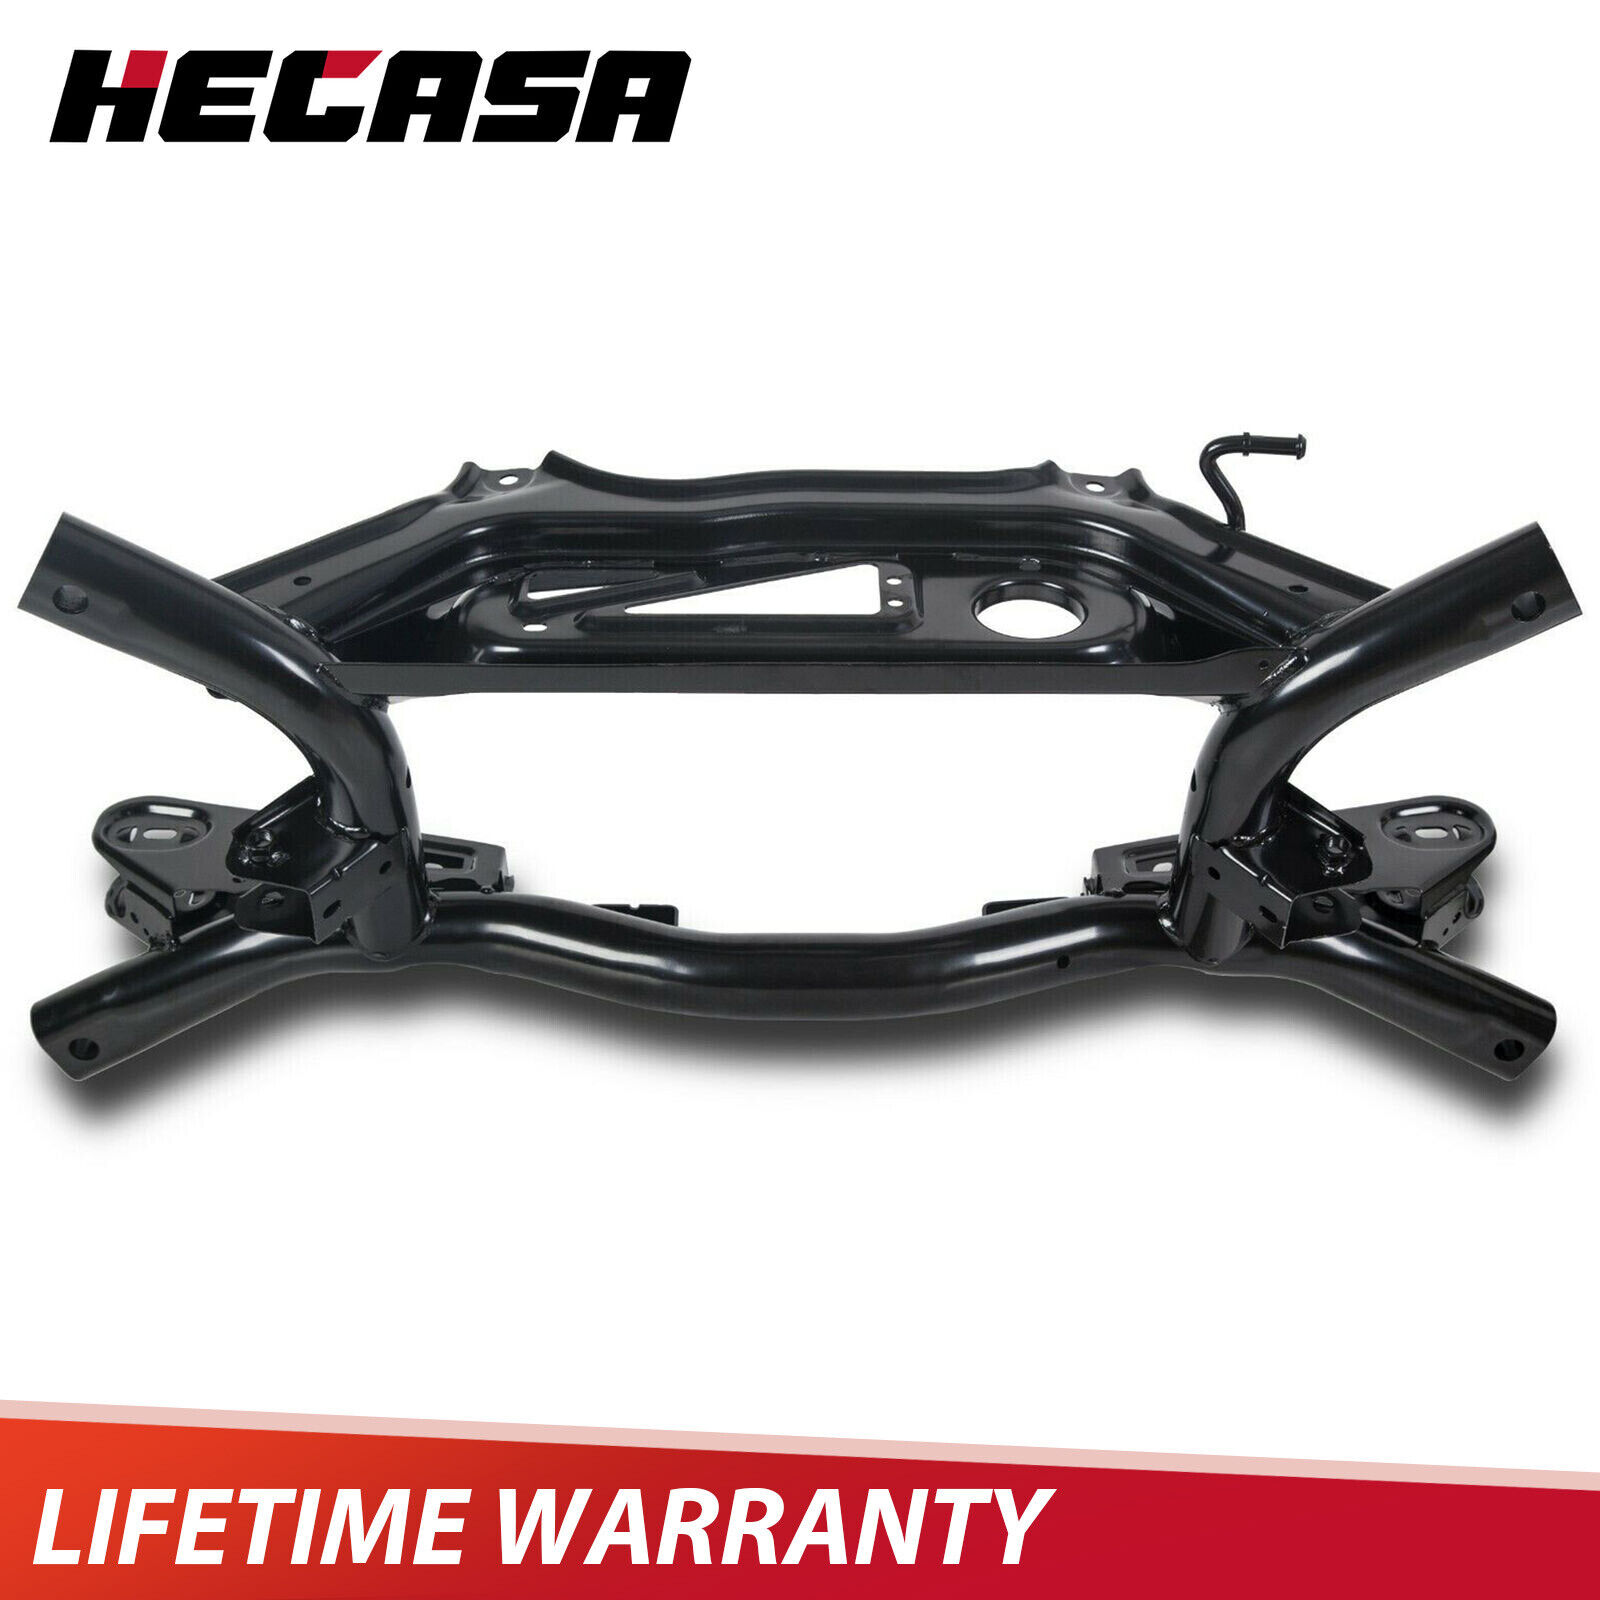 Subframe For 07-17 Caliber Jeep Compass Patriot 4WD Rear Suspension Crossmember